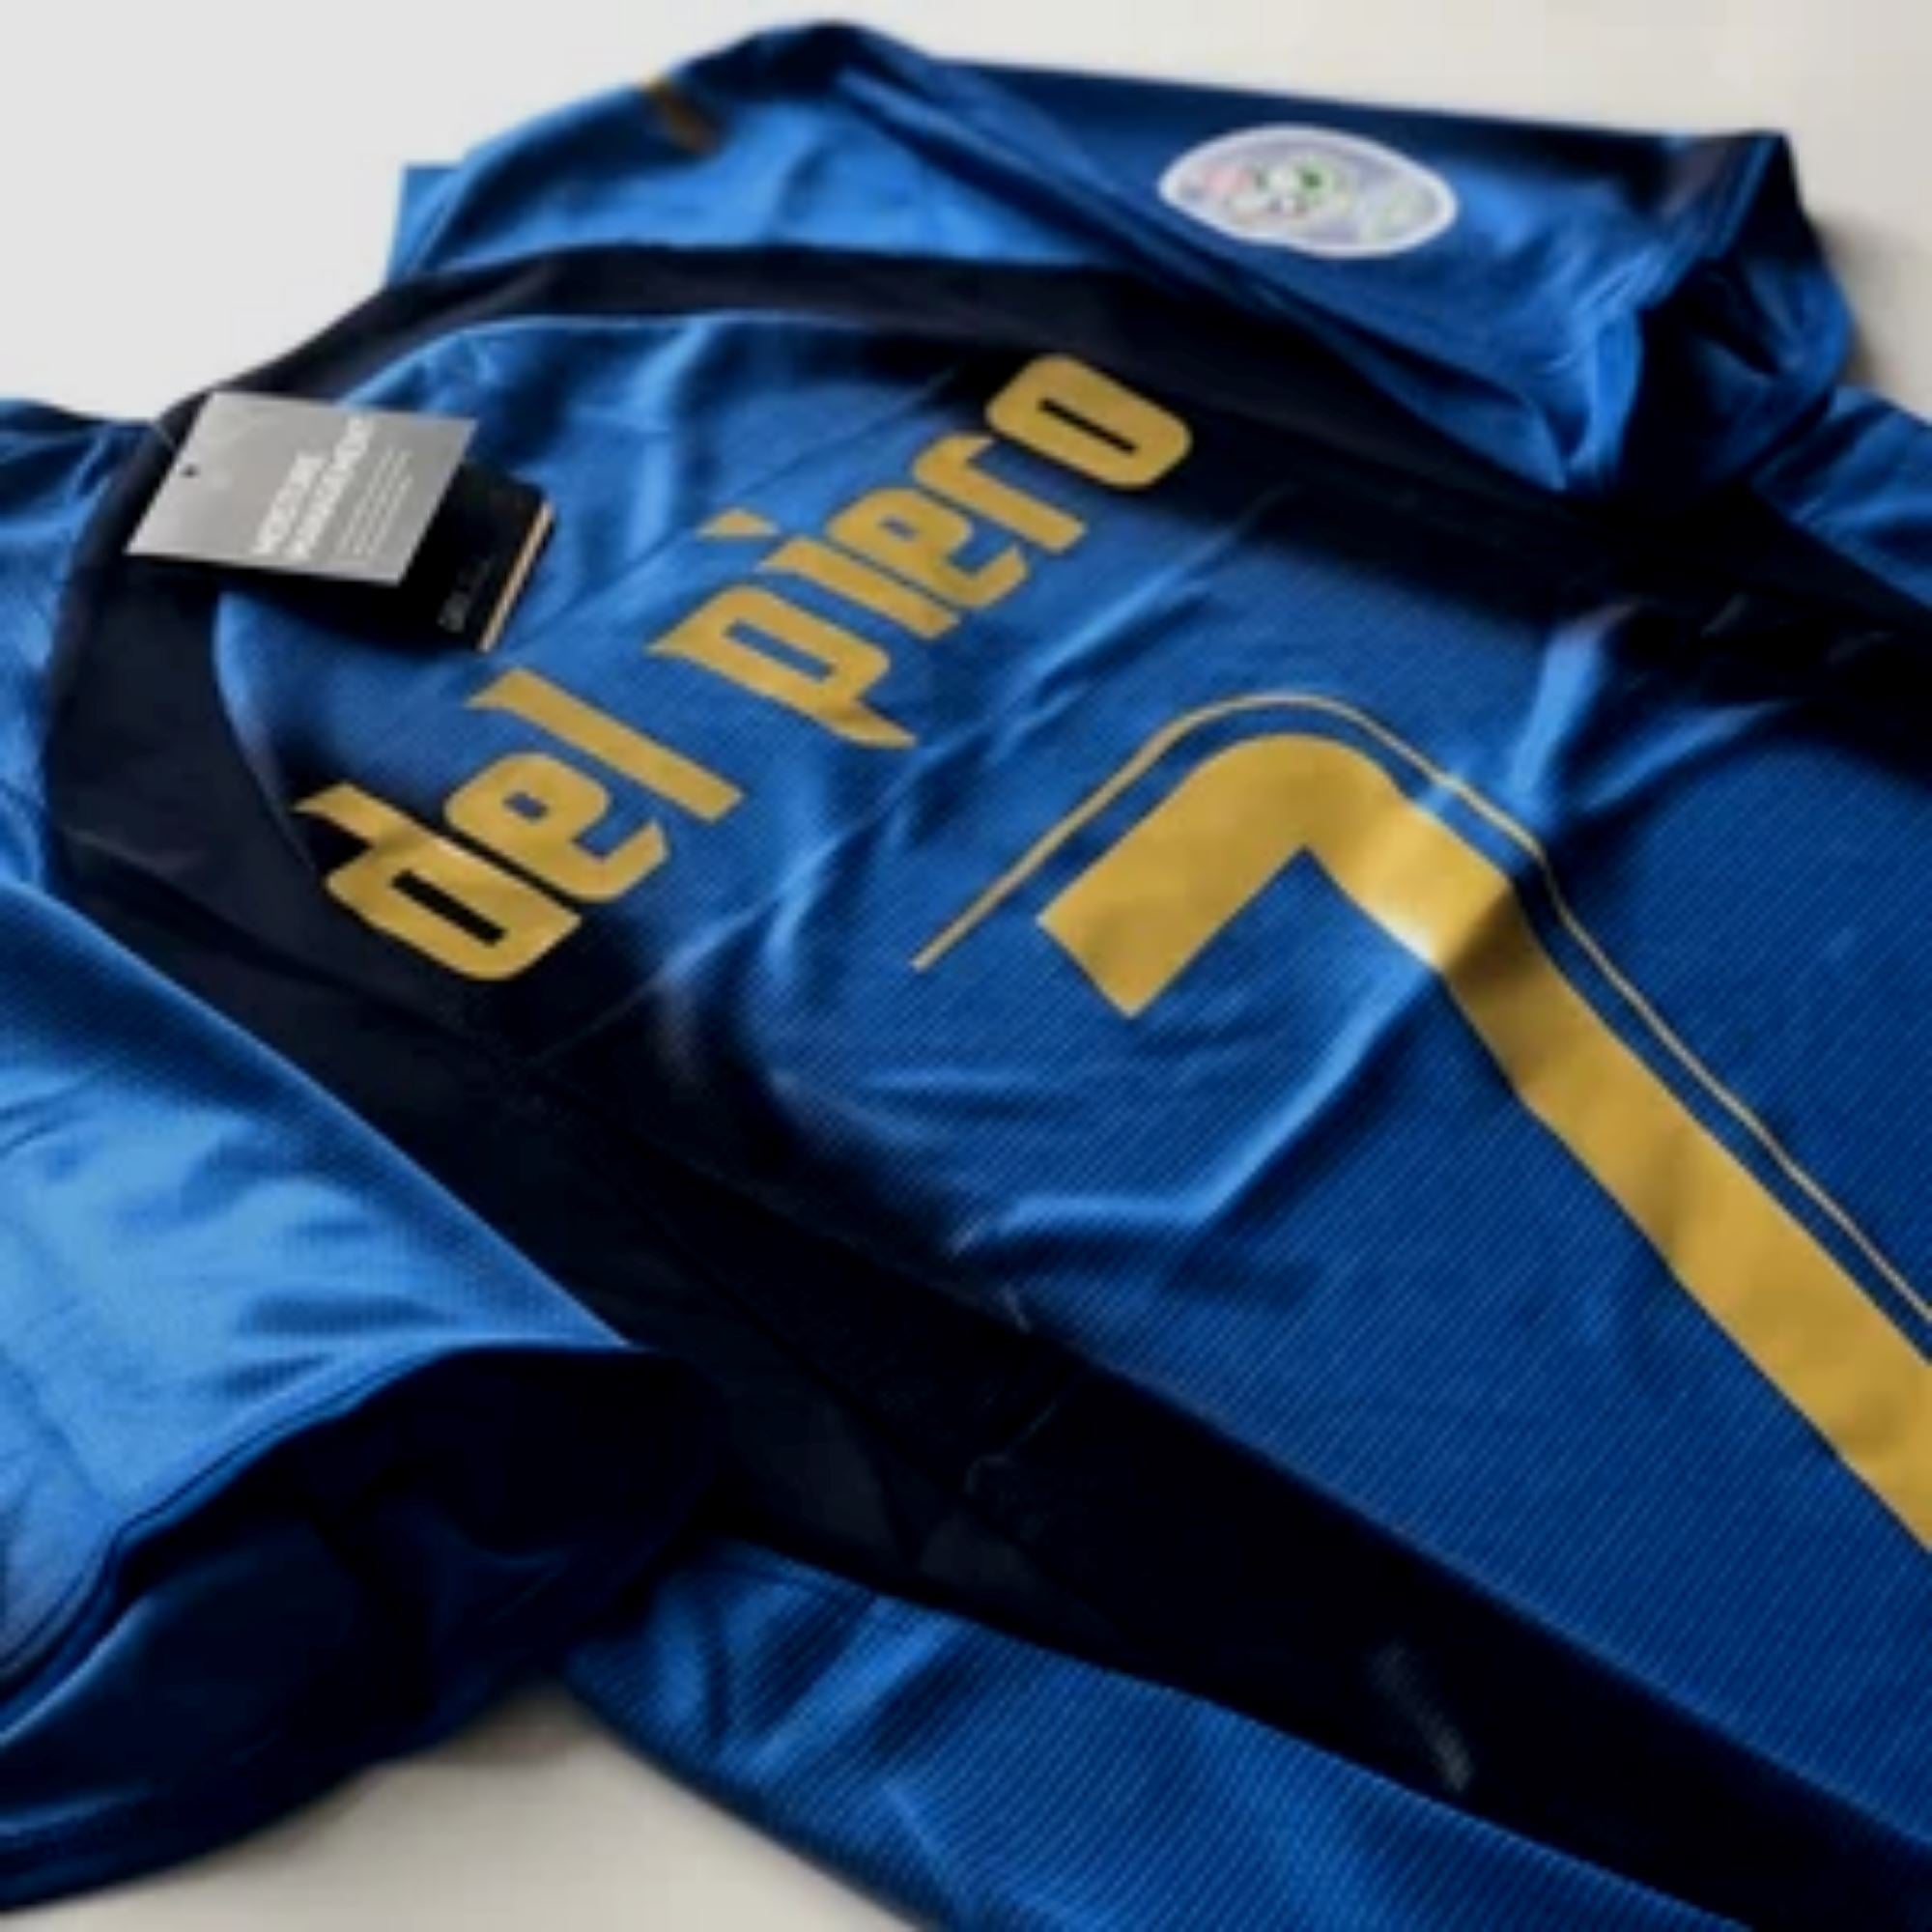 2006 Italy World Cup Home Jersey - ITASPORT